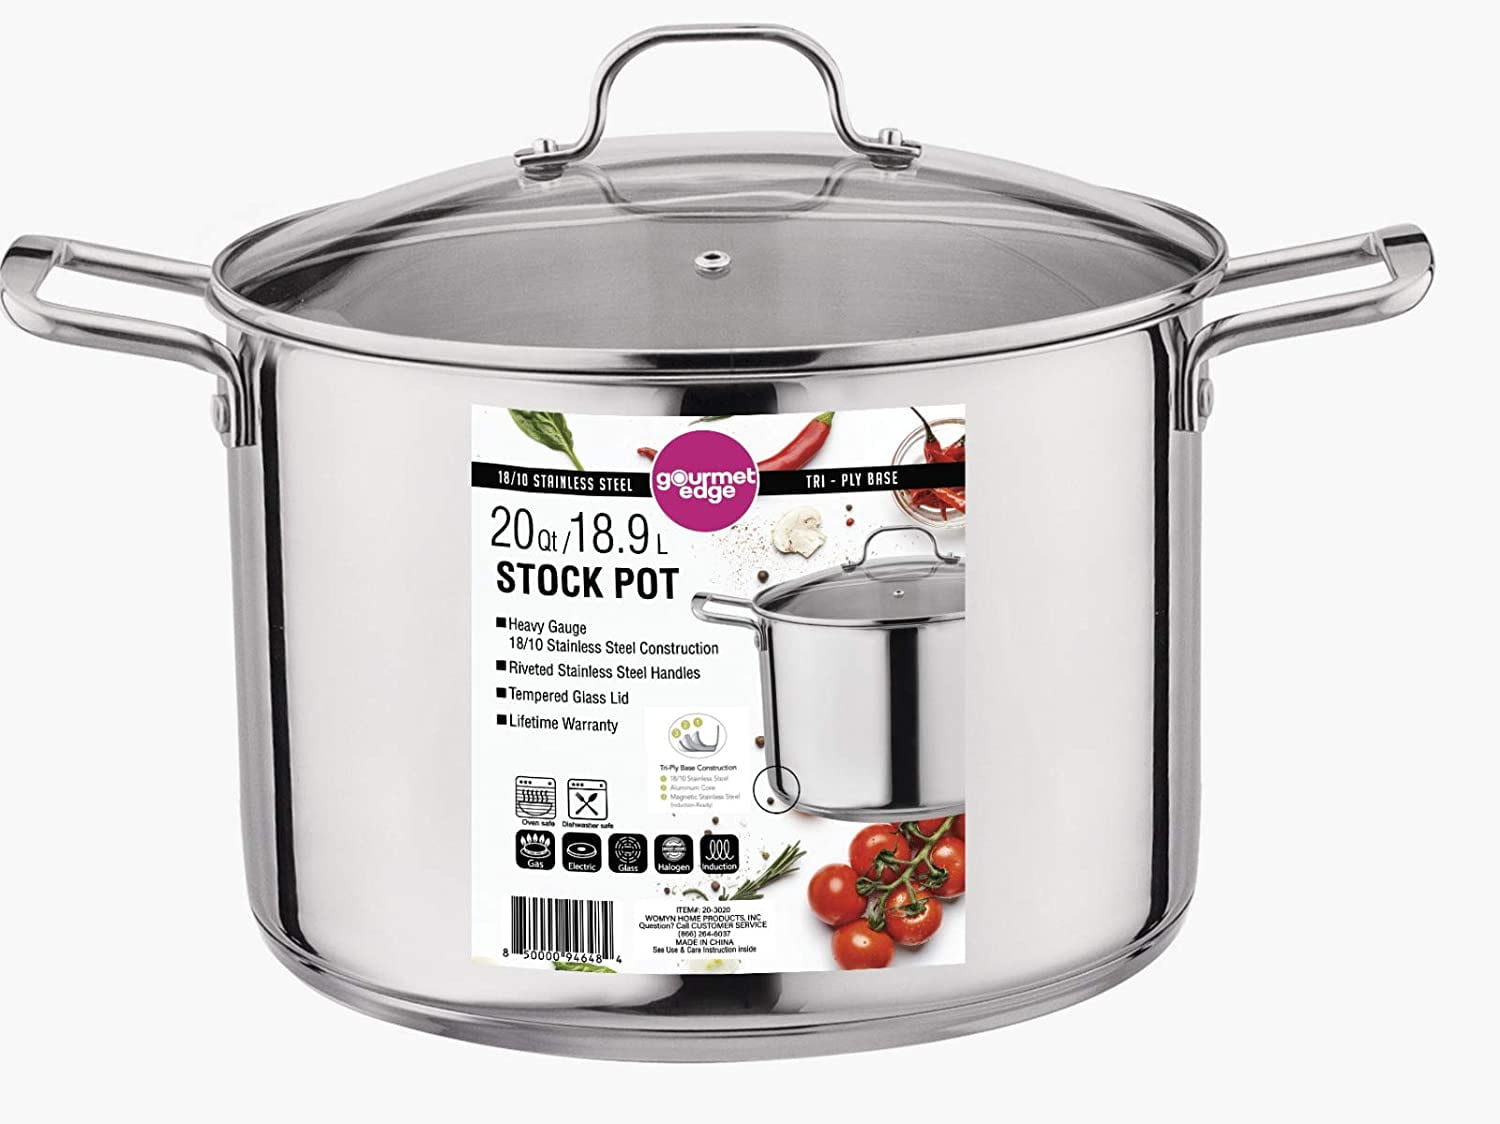 NEW 6 Ltr Stock Pot Thick 18/10 Stainless 22 cm Stockpot Induction RRP $125 